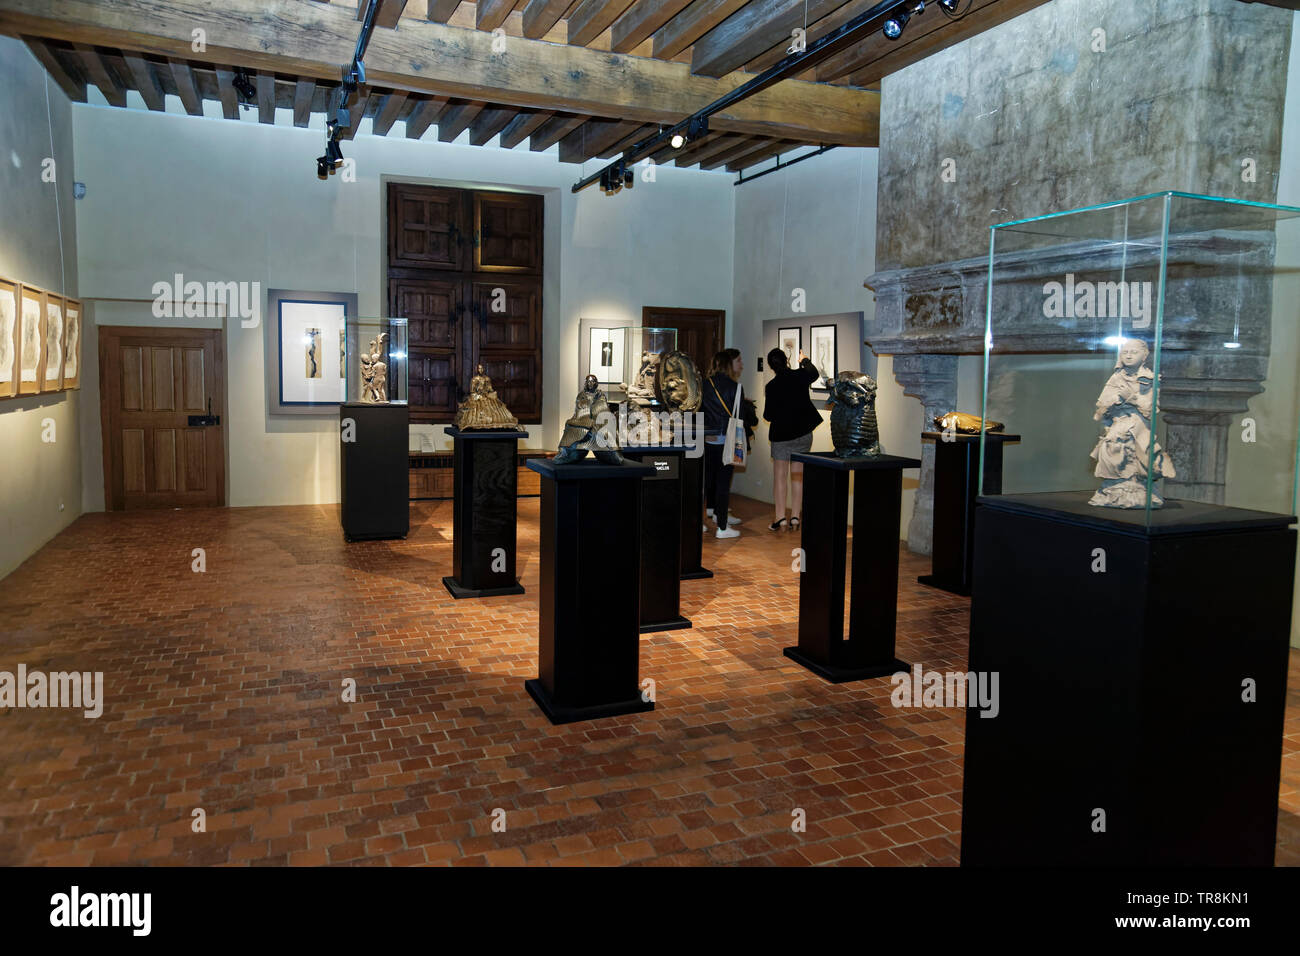 Tours, France.24th May,2019.Artworks of Georges Jenclos at Exhibition Re-naissance(s) of the Capazza Gallery:Veronique Phitoussi/Alamy Stock Photo Stock Photo